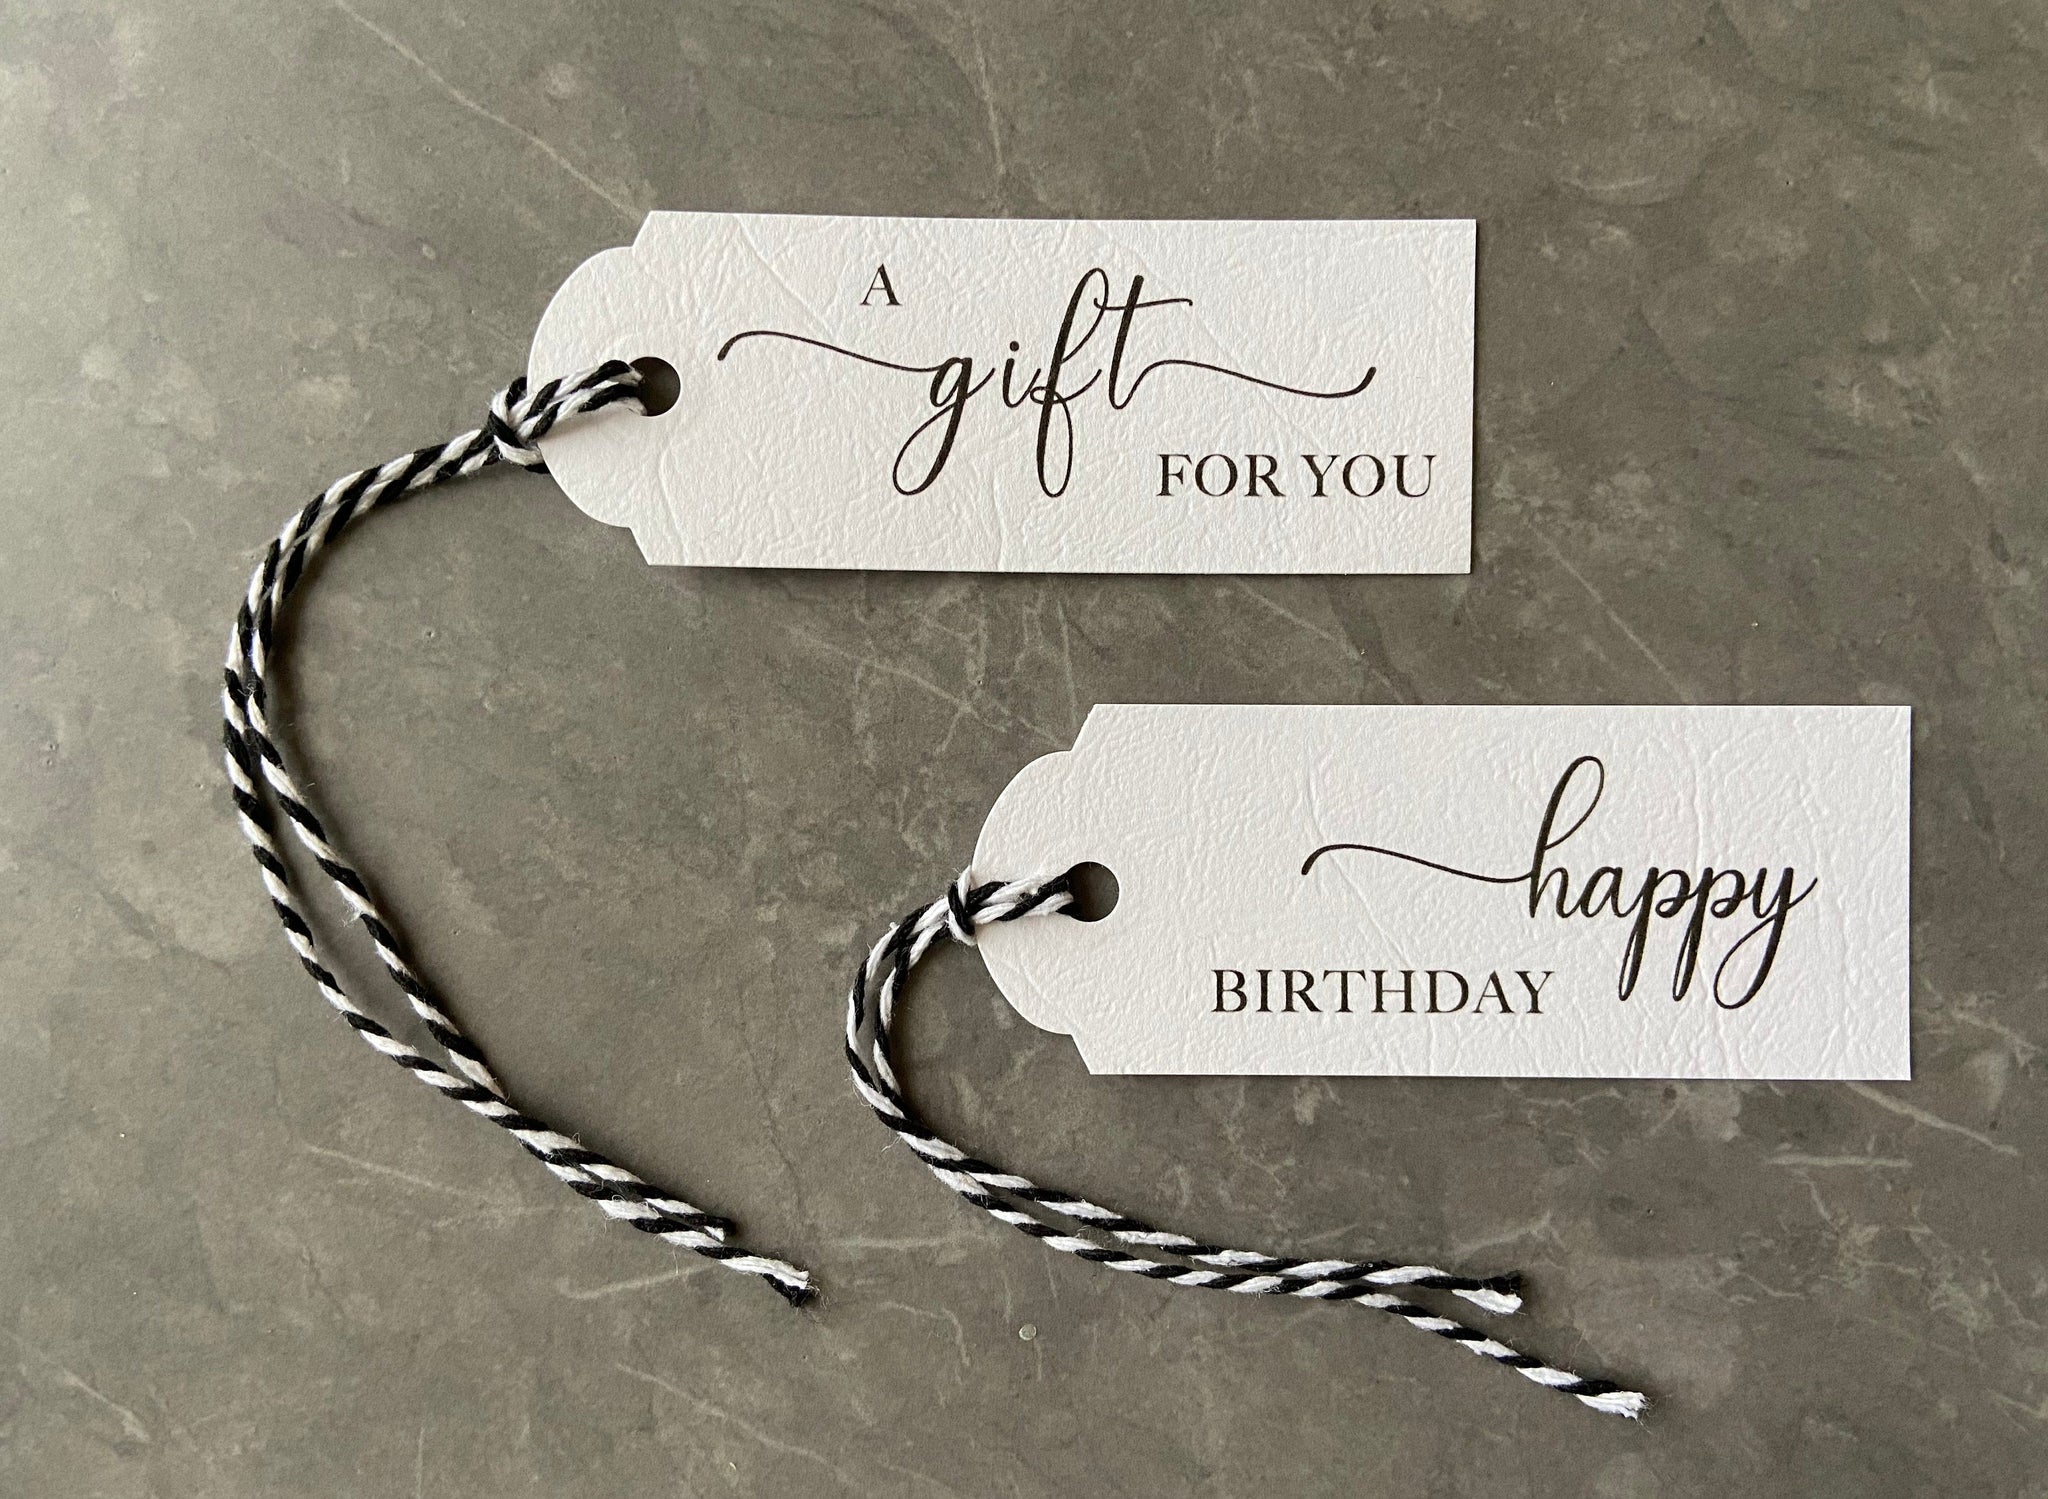 Happy Birthday Tags and Gift for You Tags